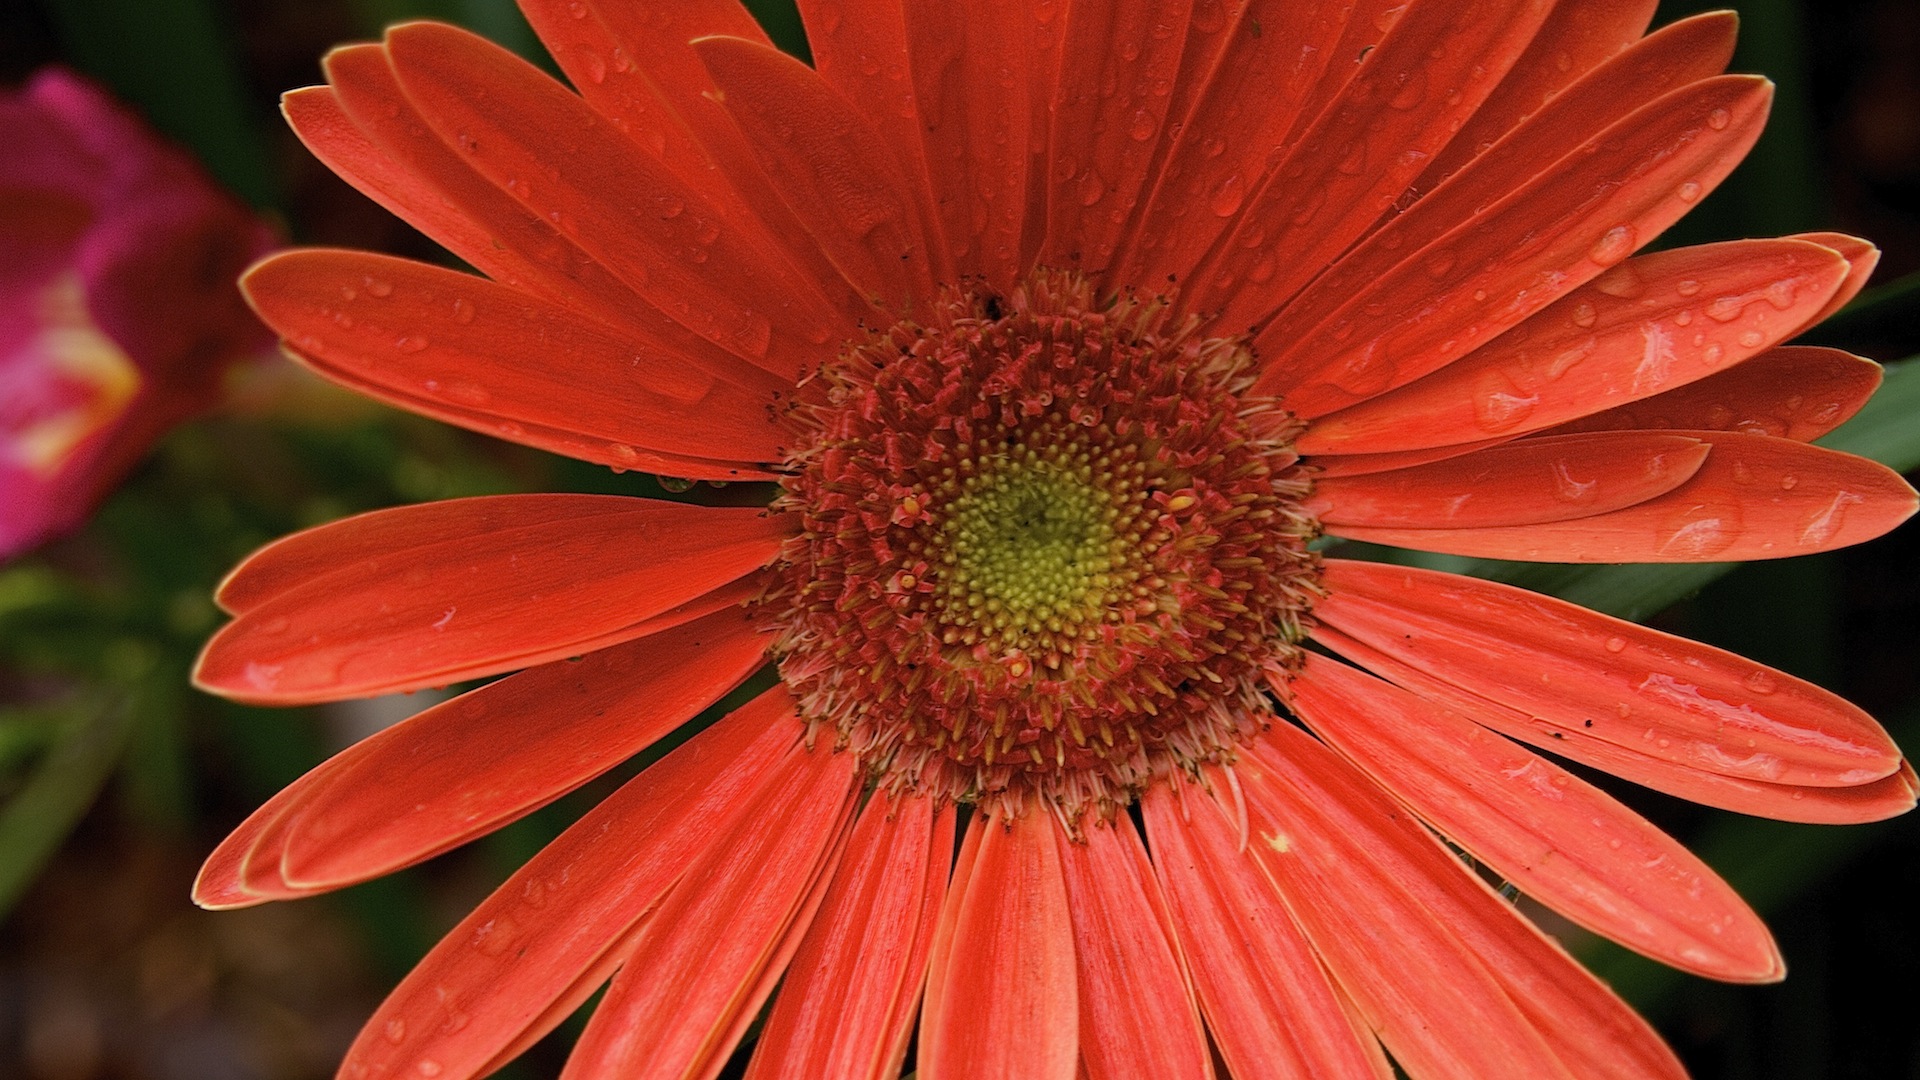  Gerbera Daisy Computer and Smartphone Wallpapers for March 2015 1920x1080